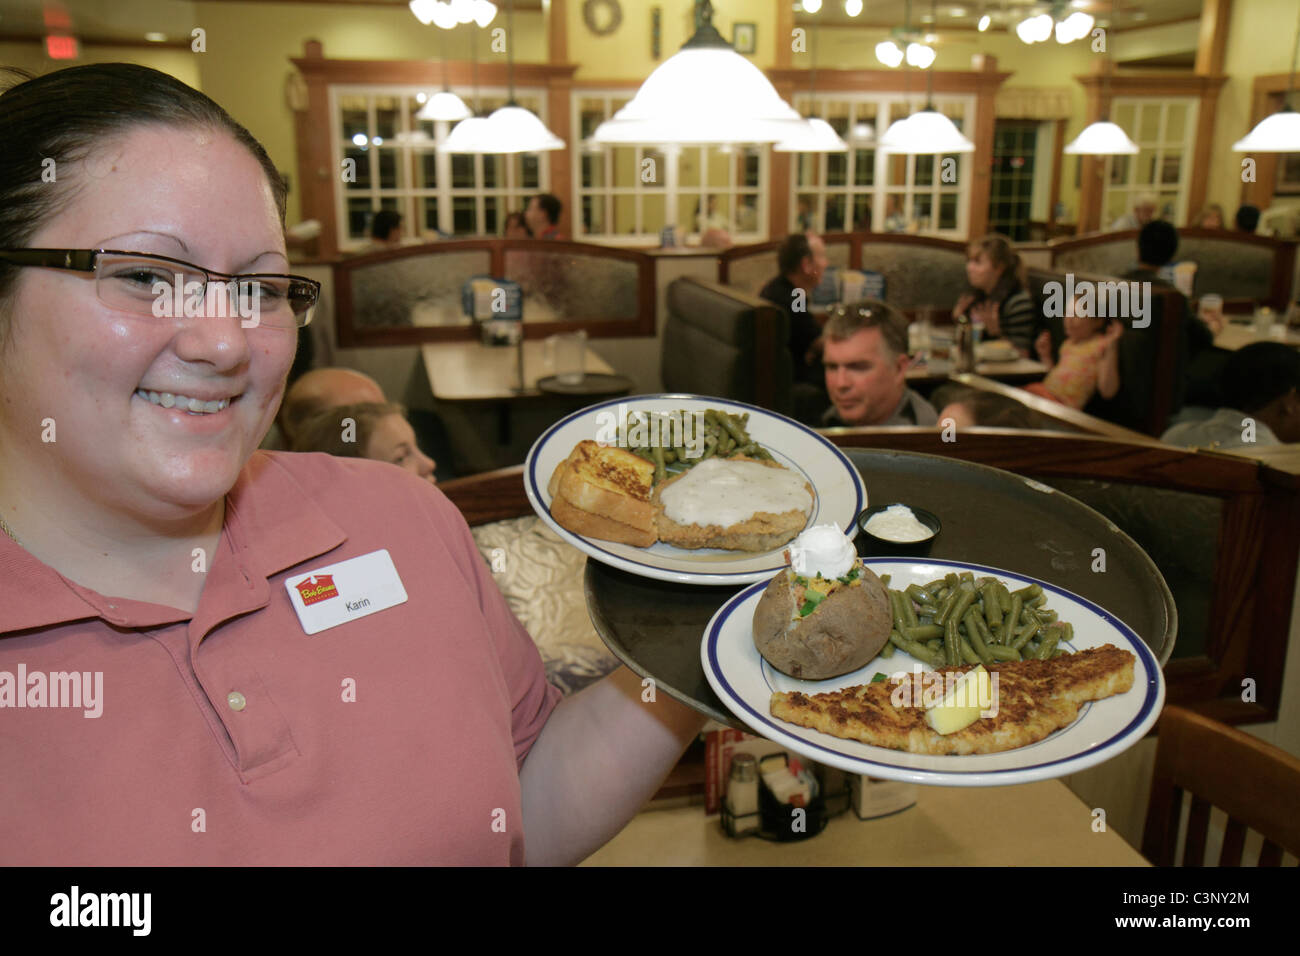 Florida,Tampa,Temple Terrace,Bob Evans,restaurant restaurants food dining cafe cafes,waitress server employee employees worker workers working staff,s Stock Photo